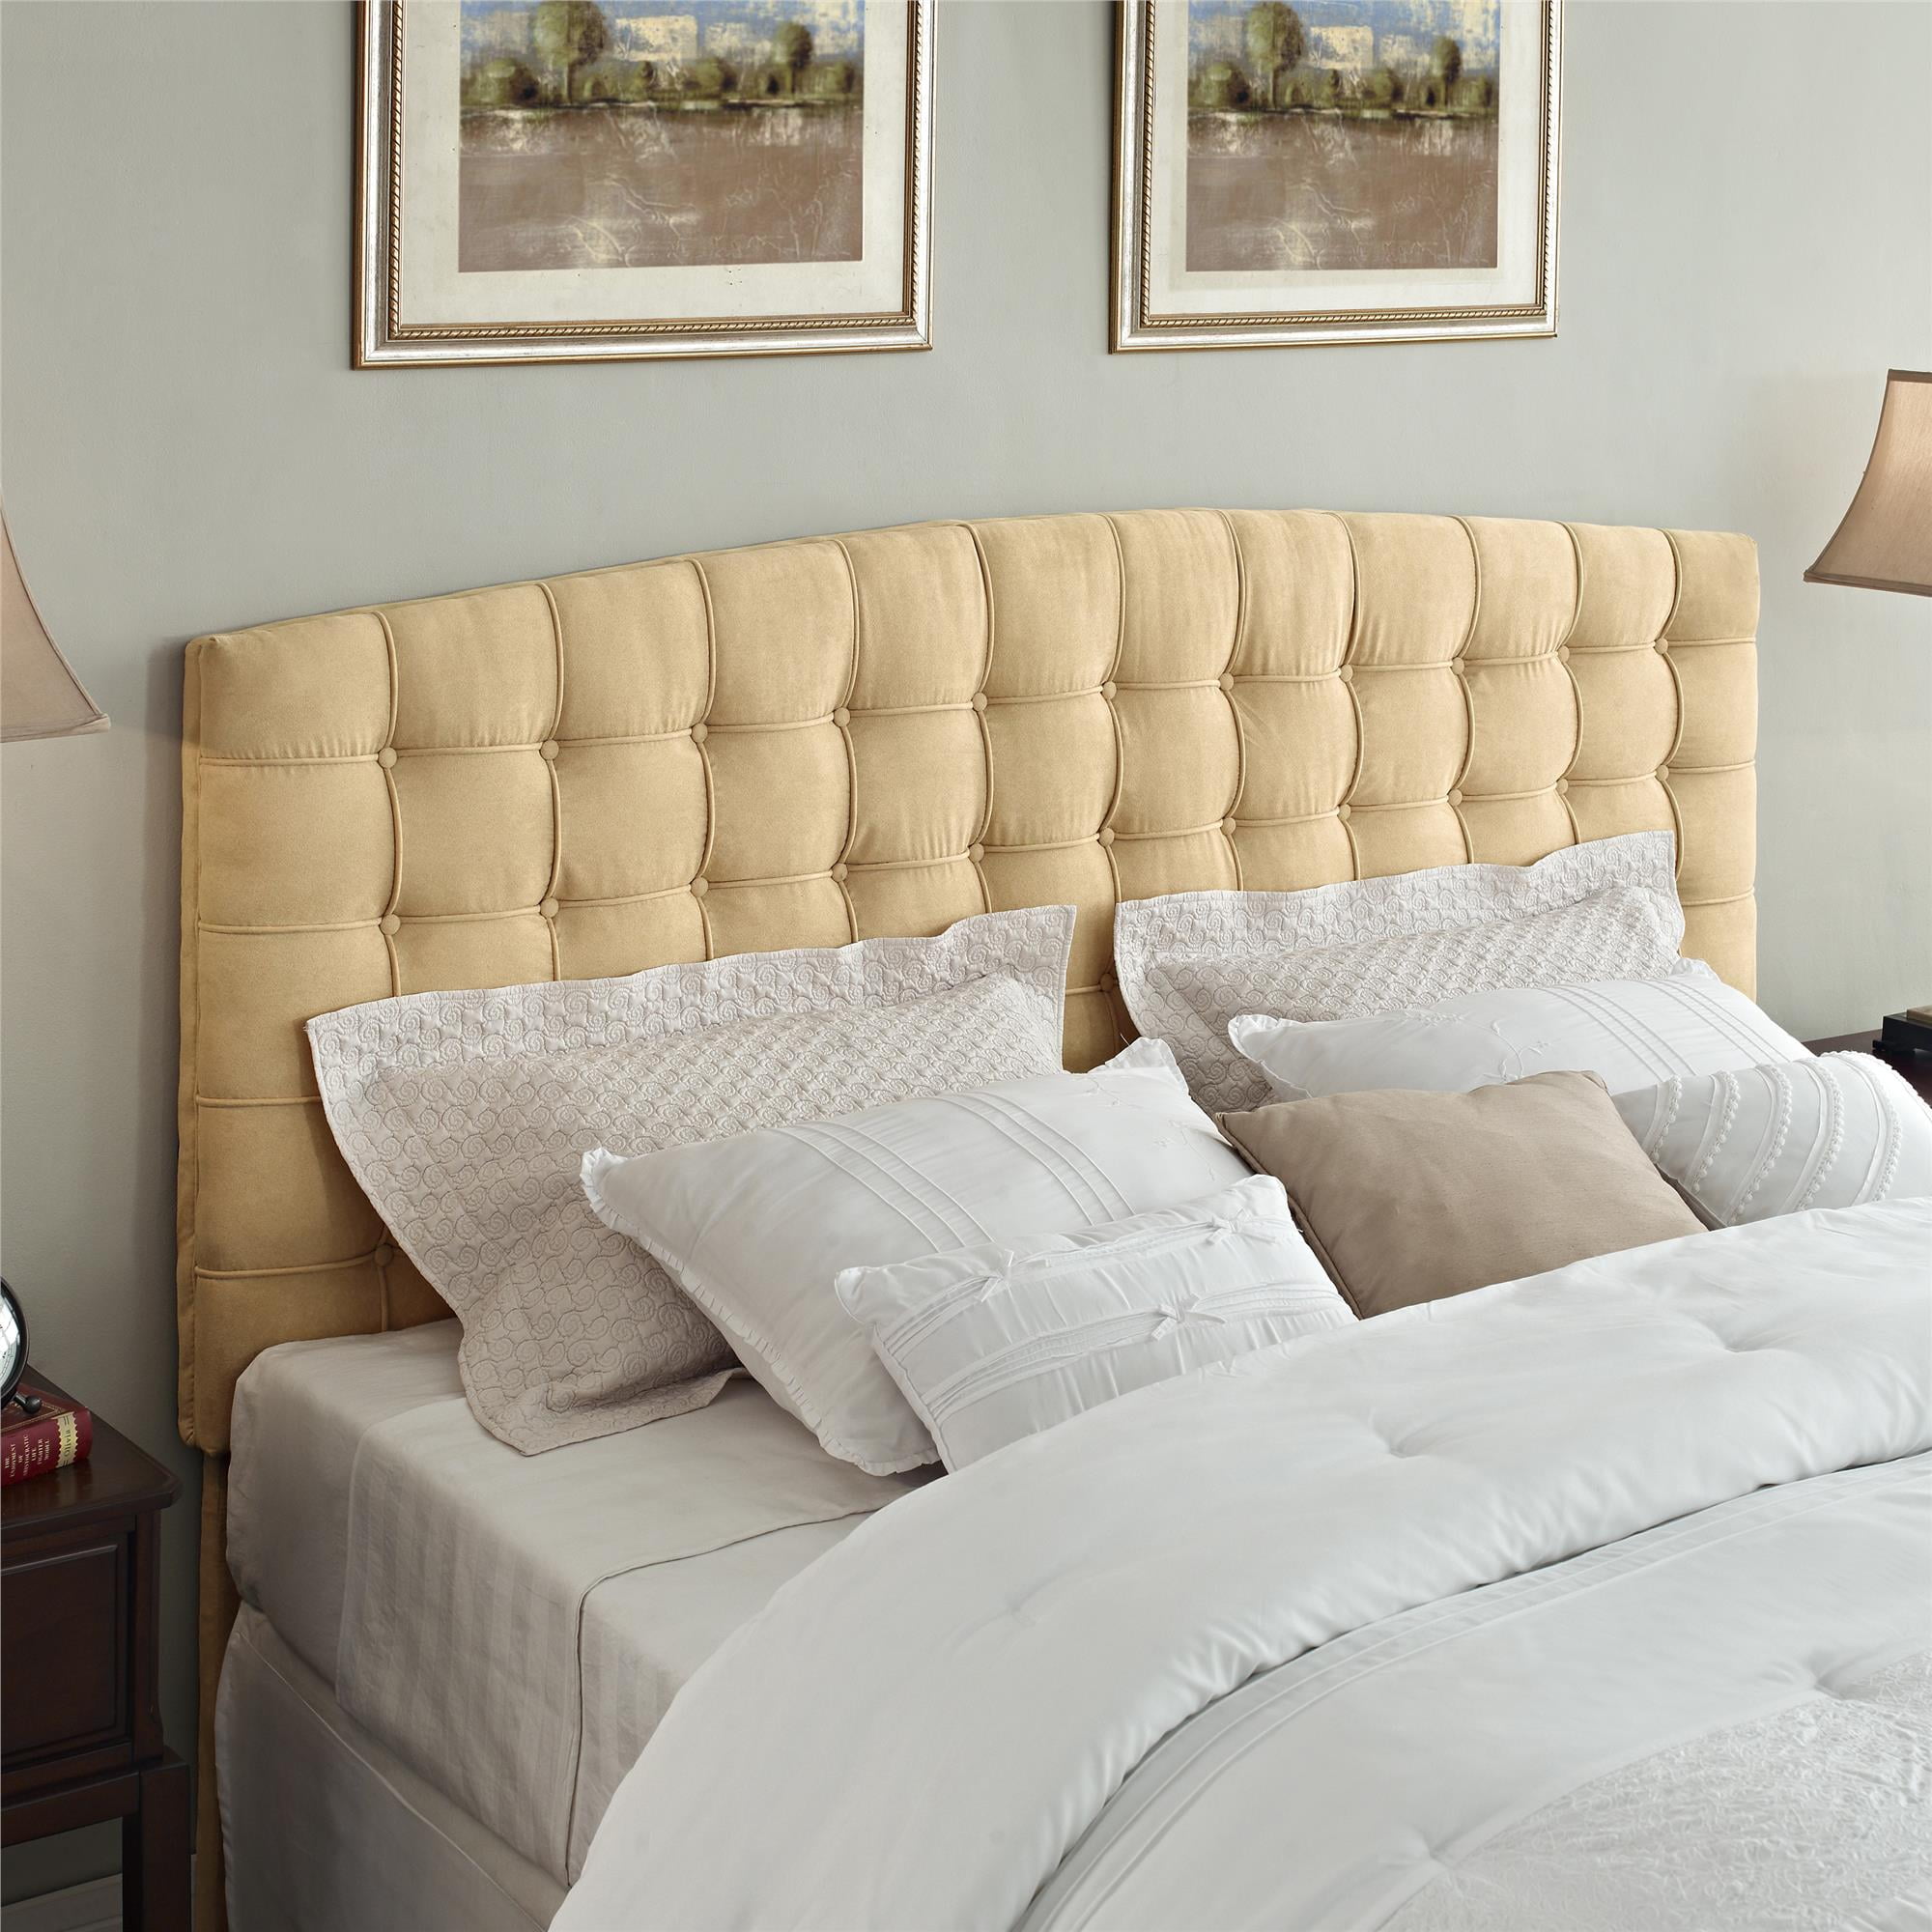 Dorel Living Winsted Linen King Headboard with Nailheads Beige